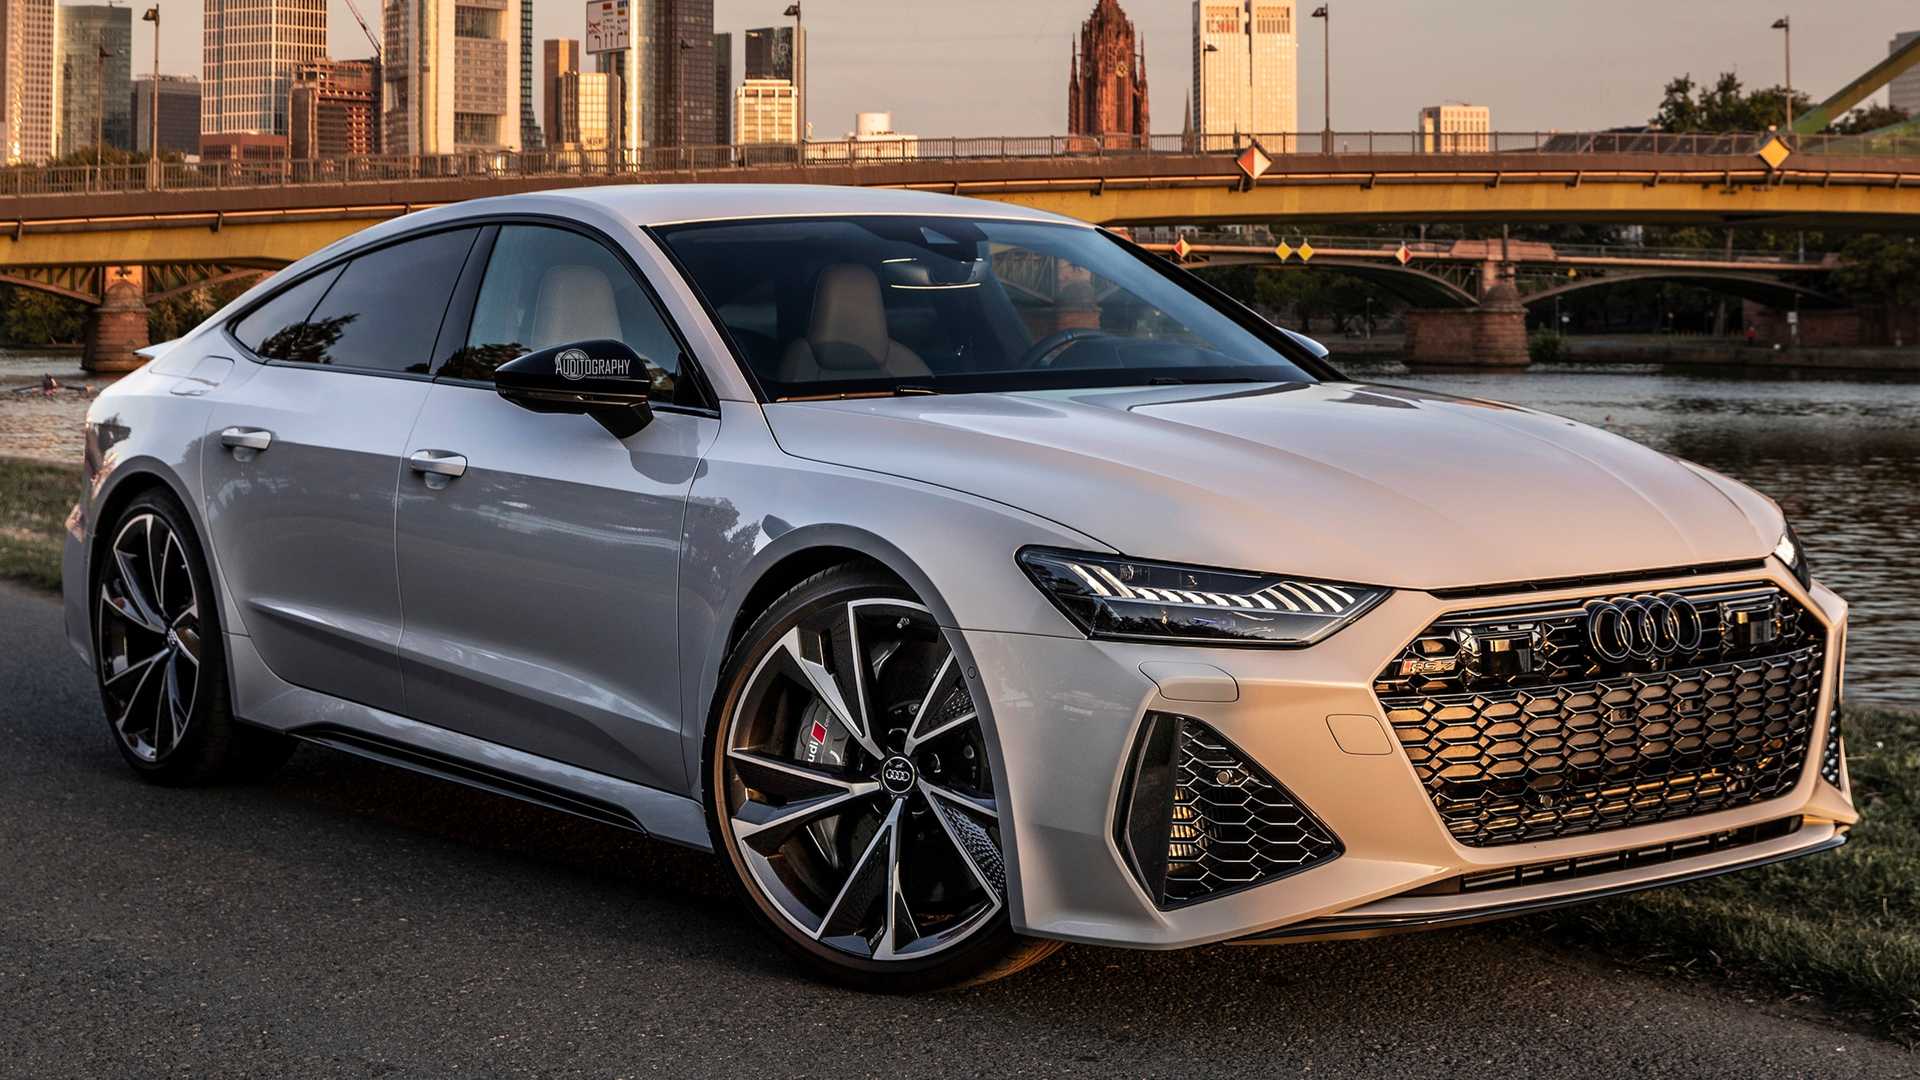 See The 2020 Audi RS7 Sportback Hit 62 MPH In 3.4 Seconds